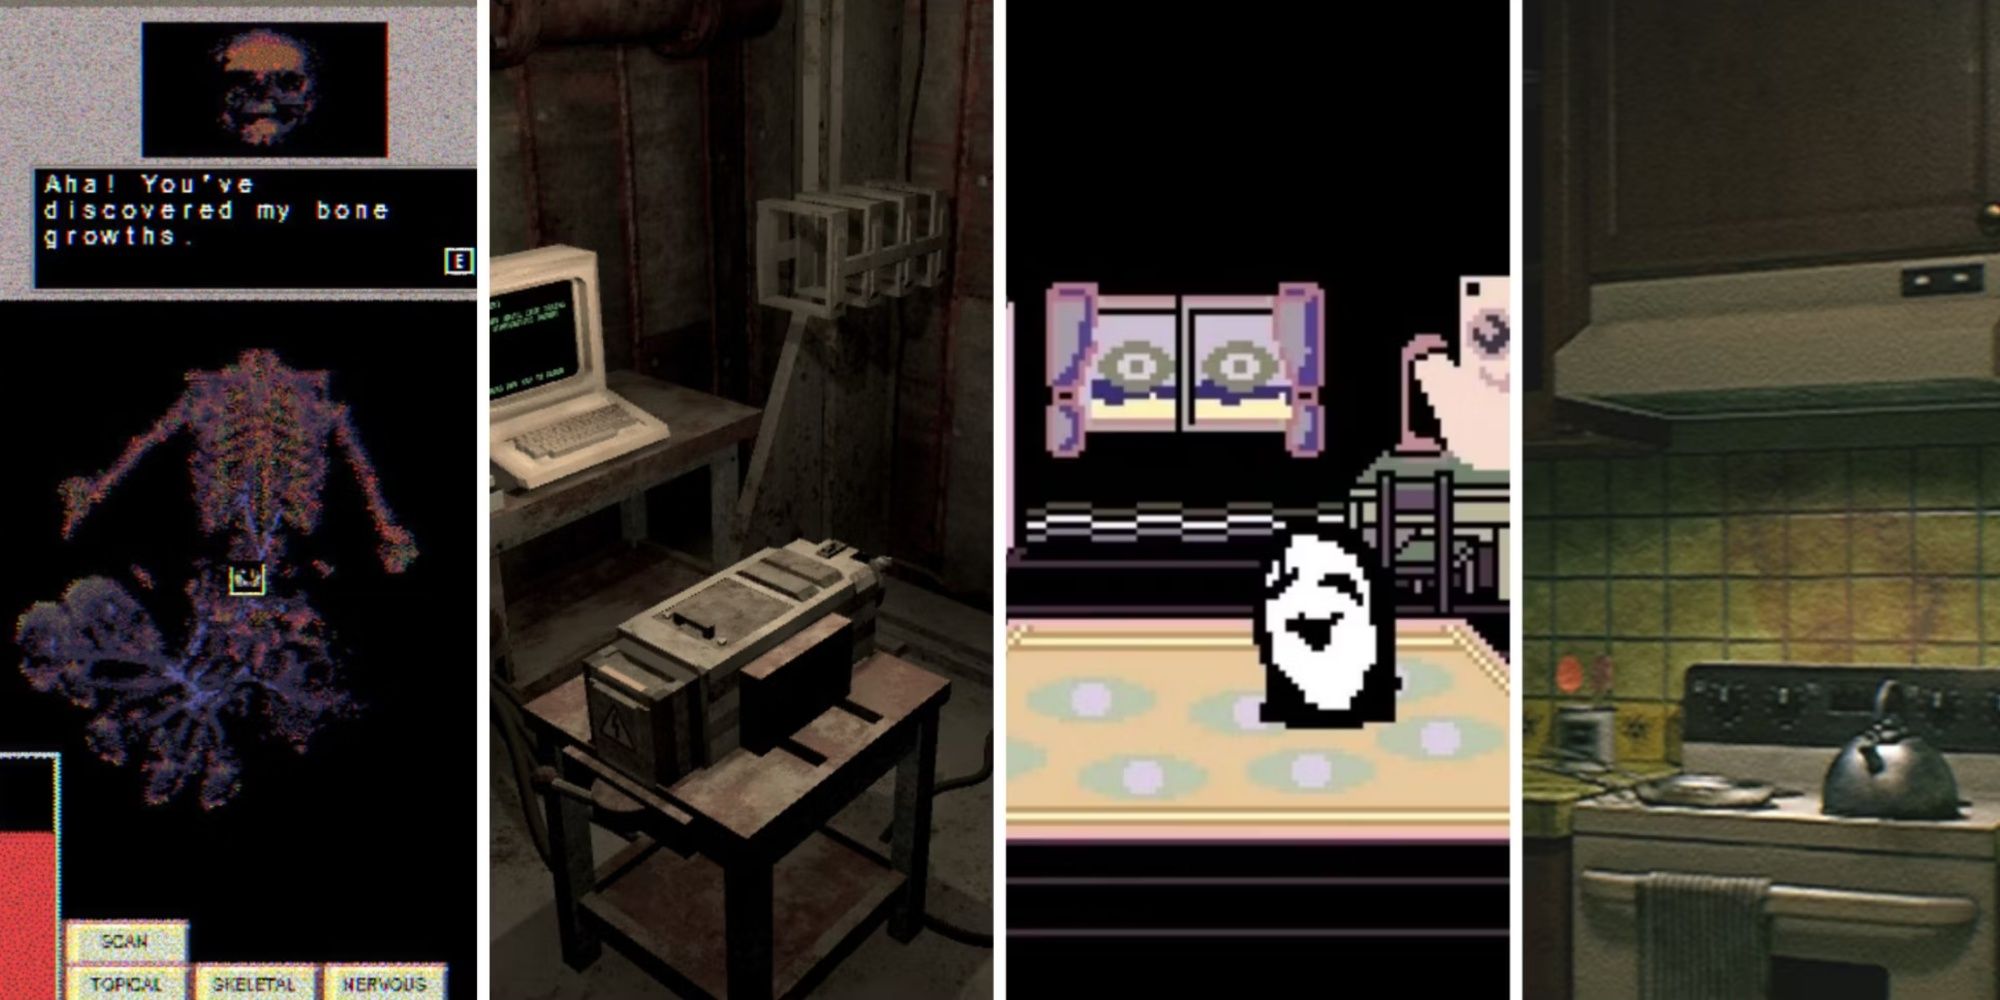 I Played the Mascot Horror Game So You Don't Have to